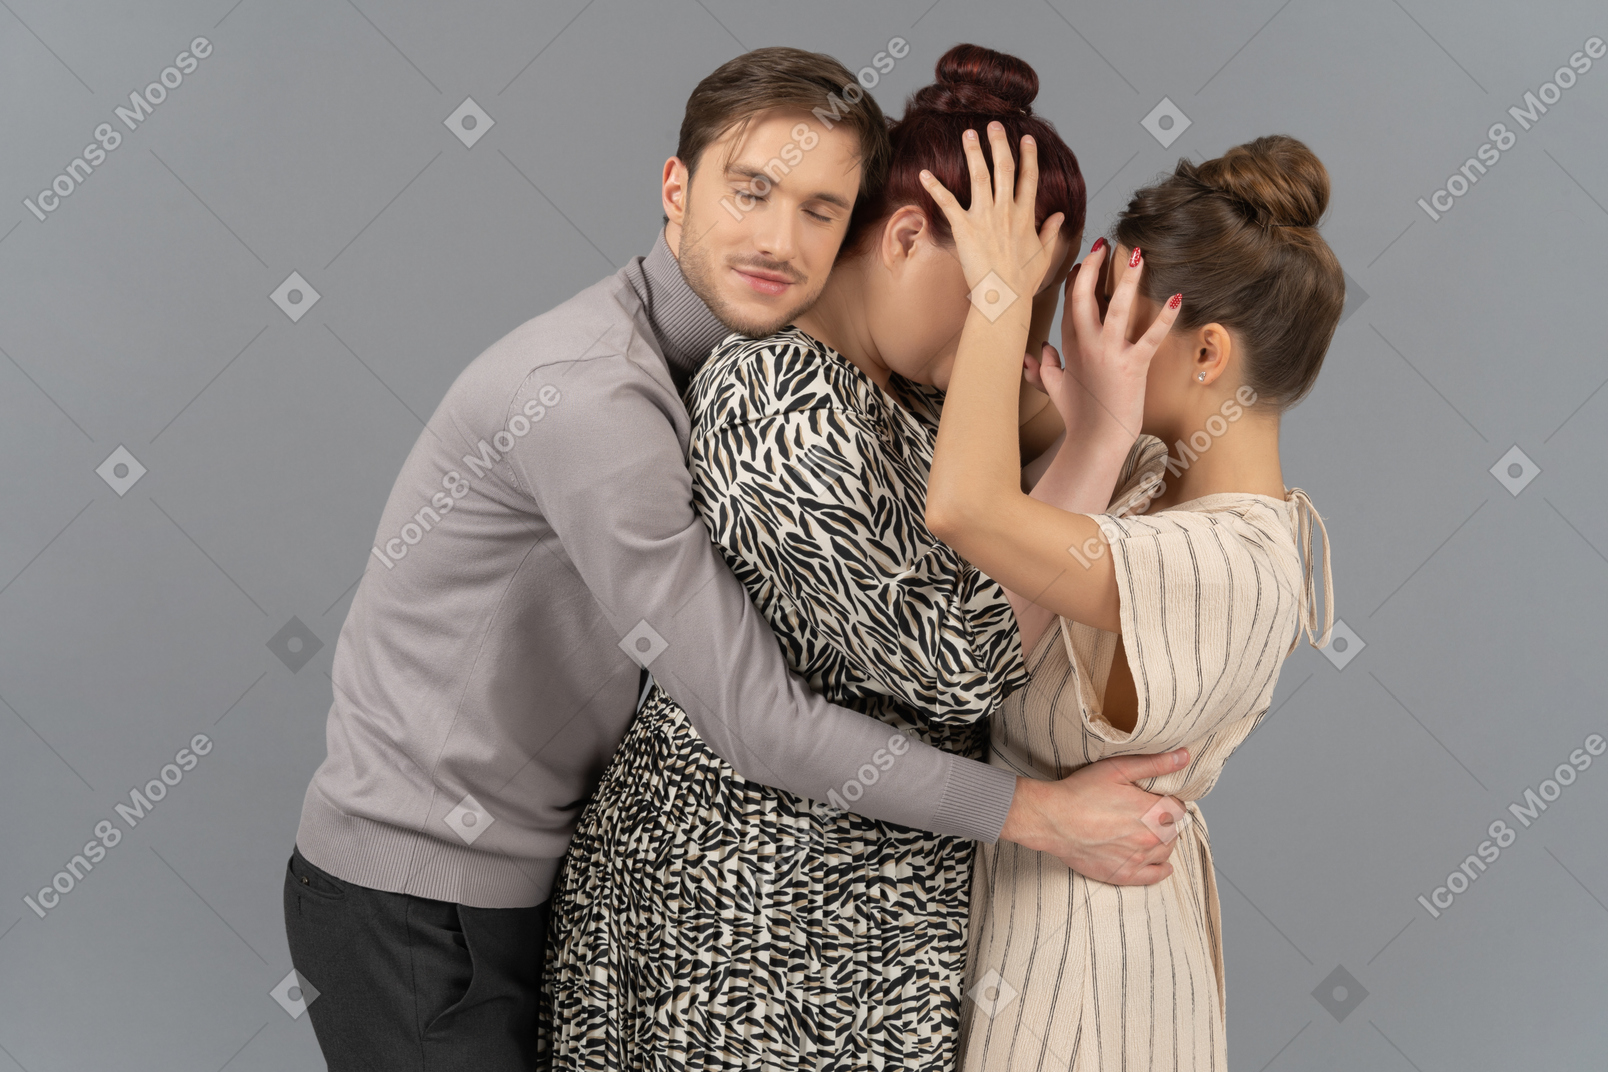 Young man embracing two young rival women